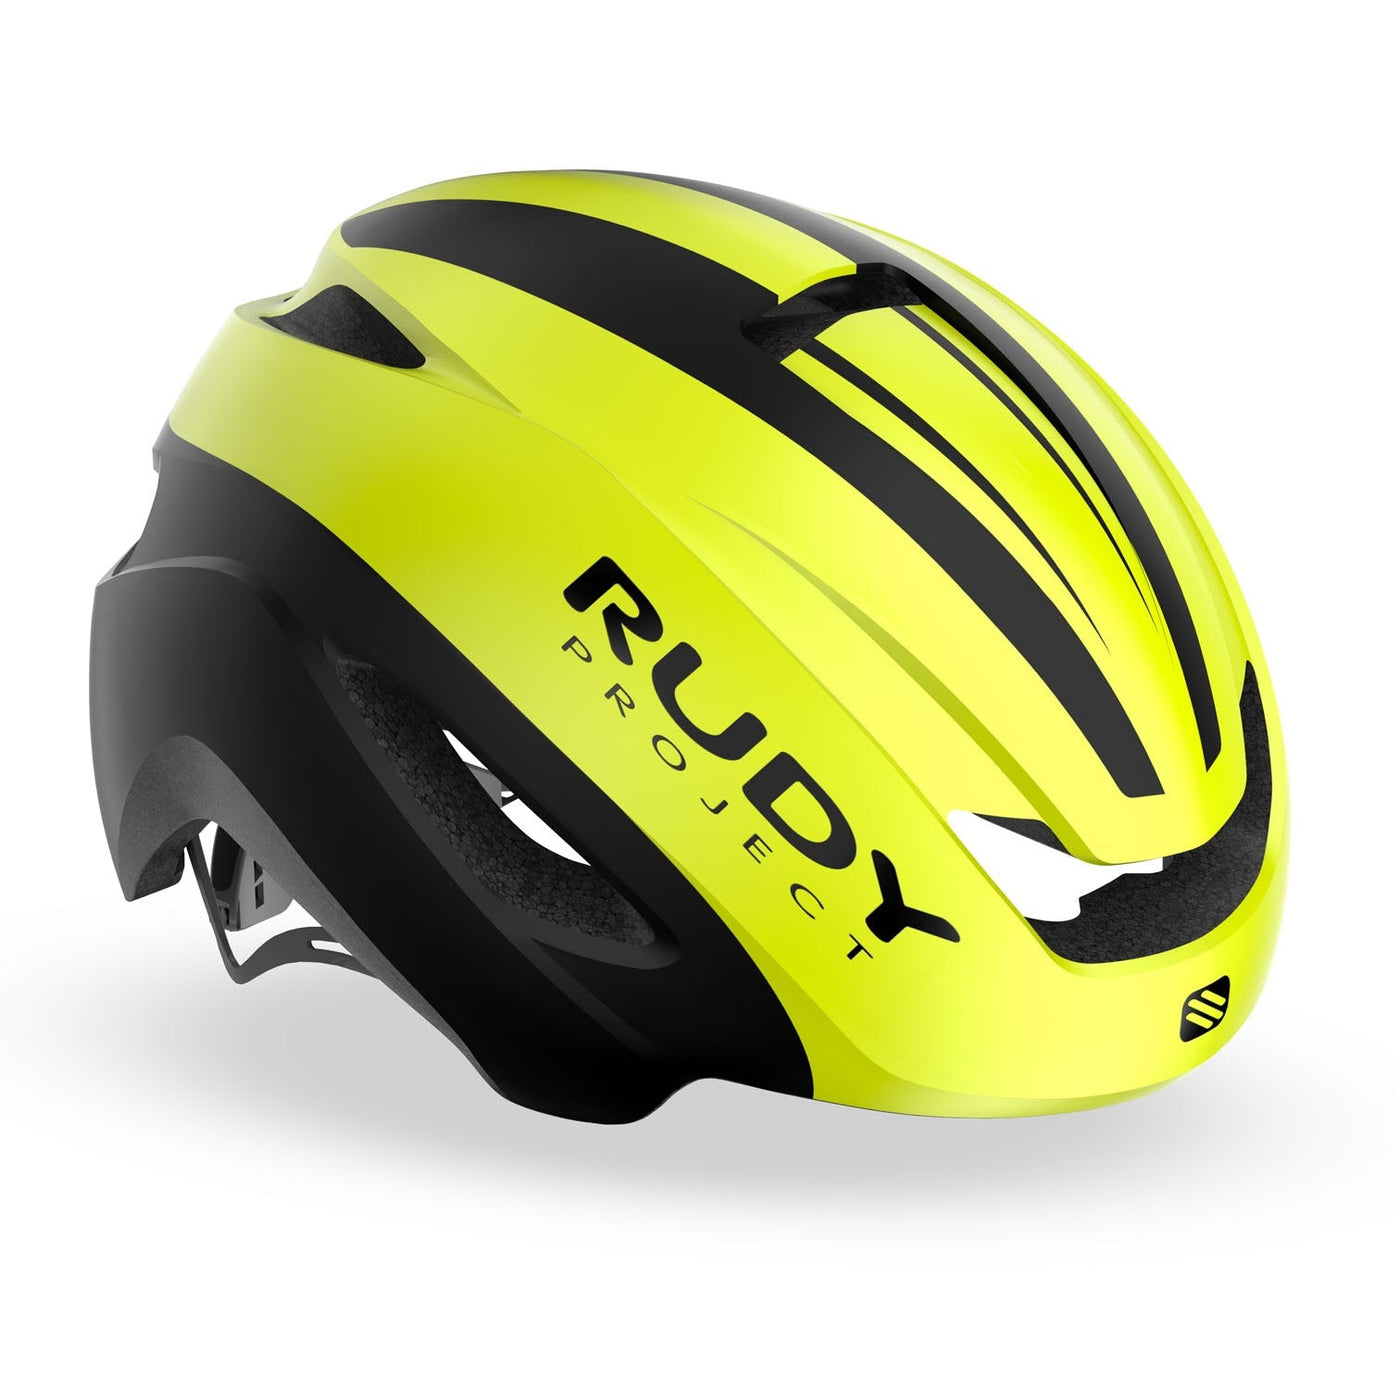 Rudy Project Volantis Road Cycling Helmet (Yellow Fluo/Black-Matte)